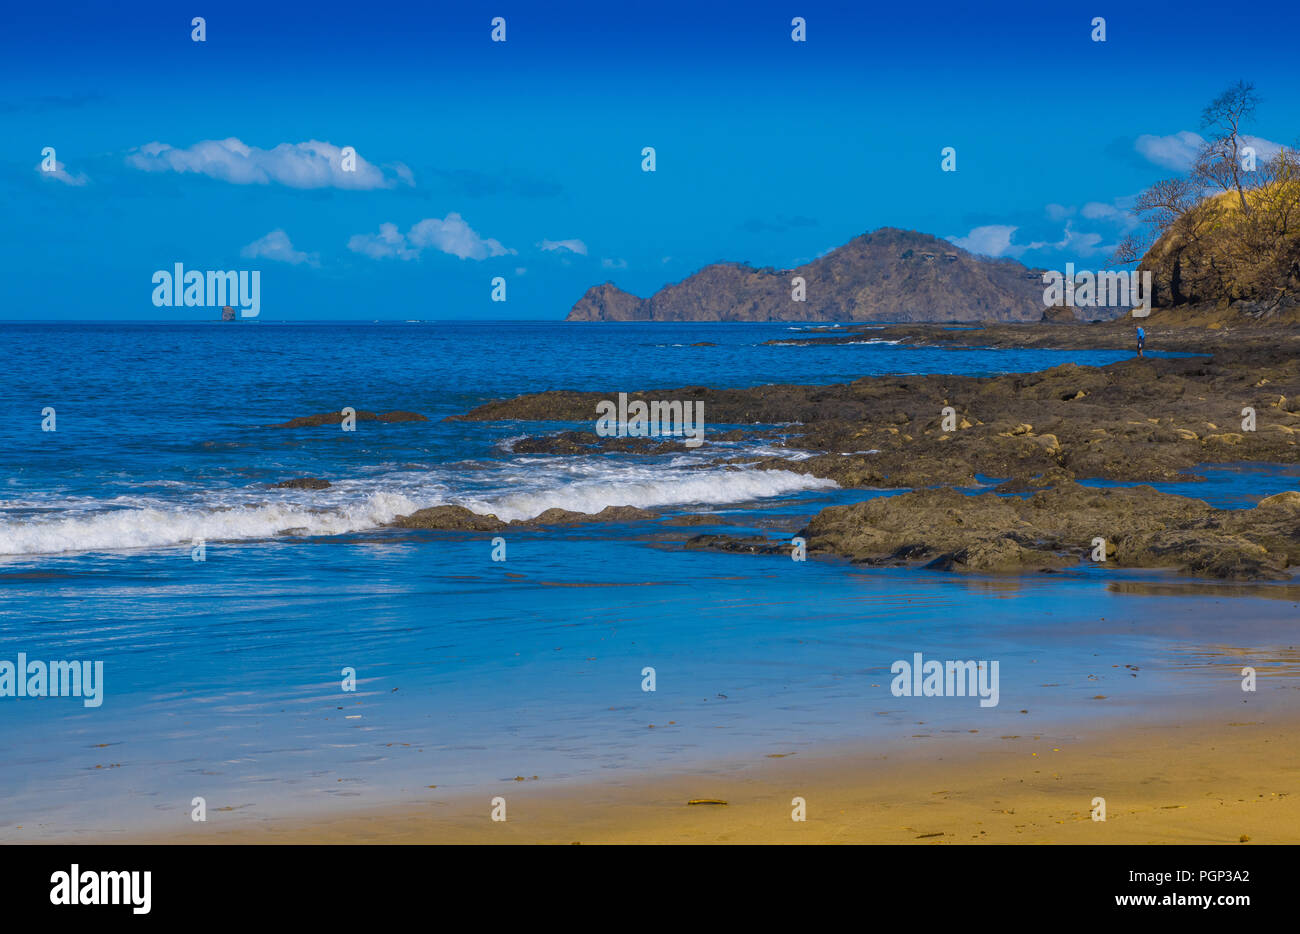 Beautiful outdoor view of of gorgeous rocky beach in Playa hermosa with blue water and beautiful sunny day with blue sky in Costa Rica. Stock Photo